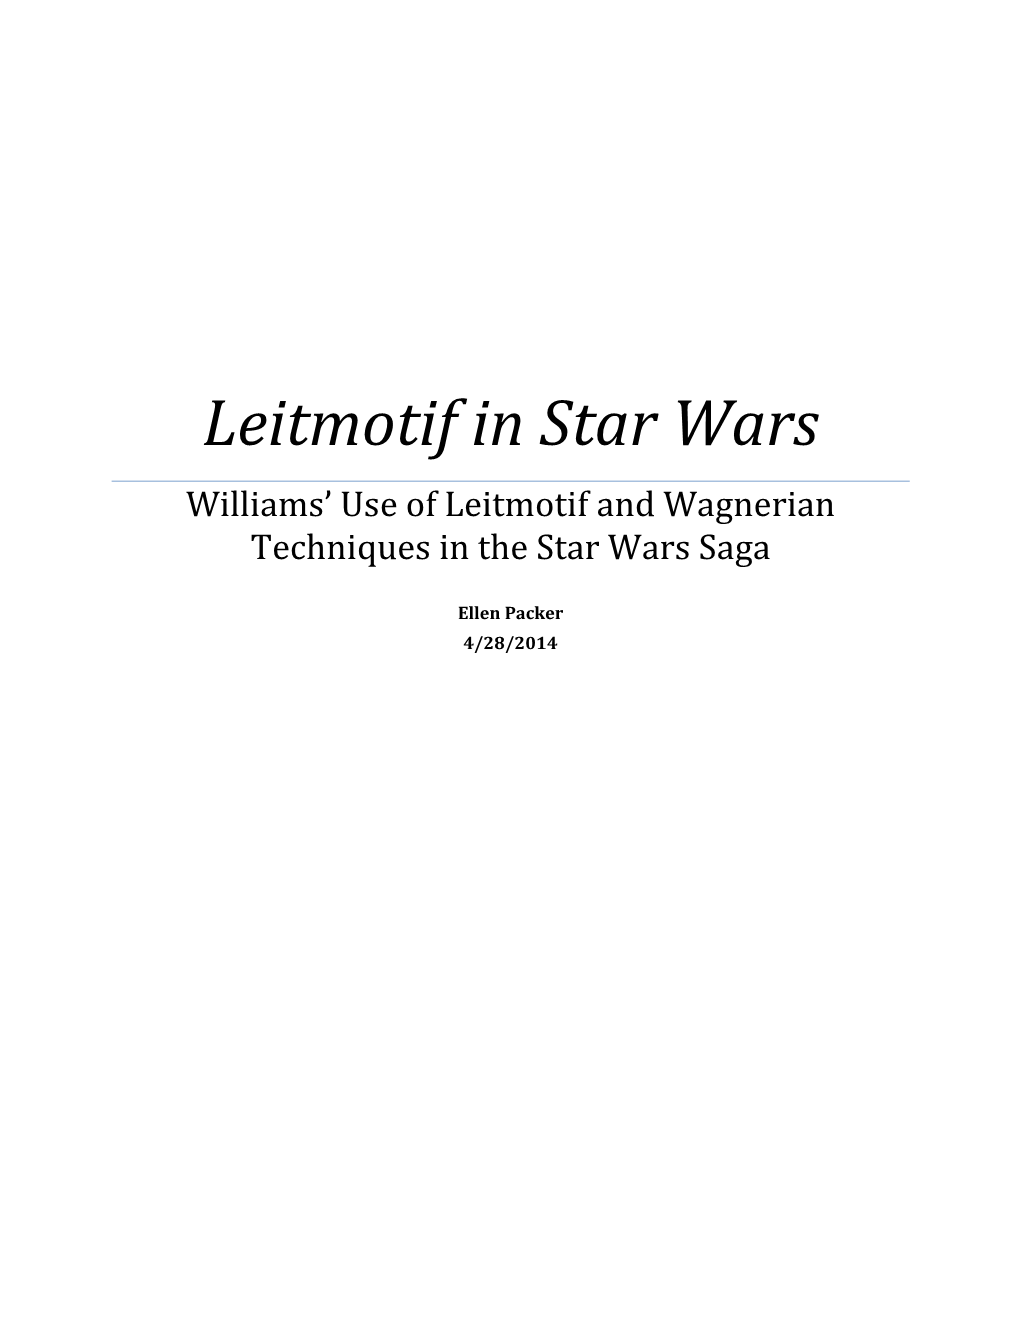 Leitmotif in Star Wars Williams’ Use of Leitmotif and Wagnerian Techniques in the Star Wars Saga